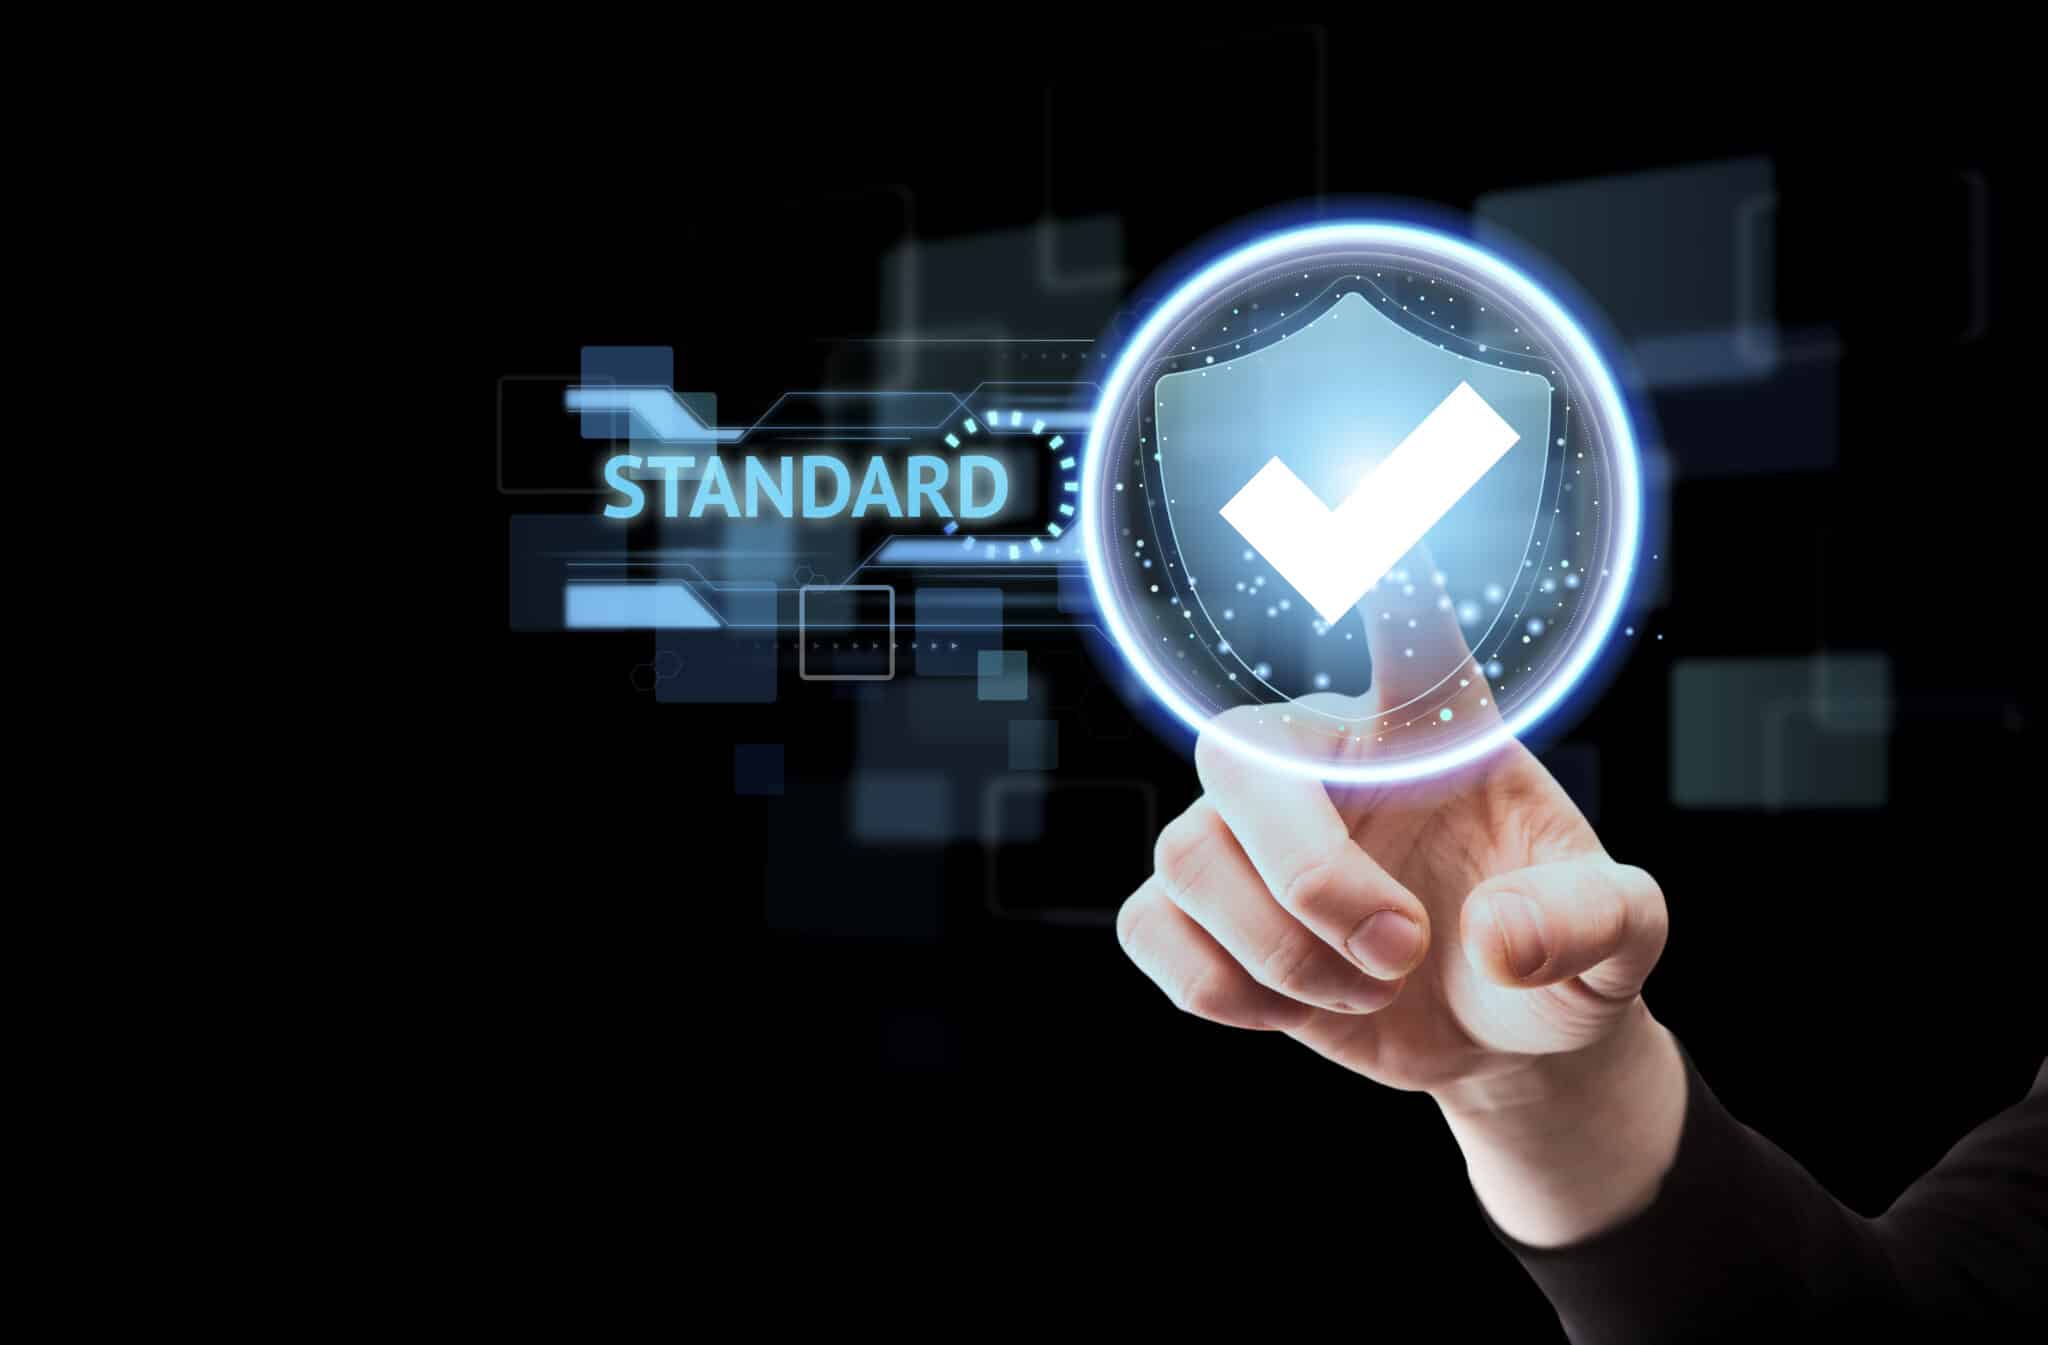 PCI DSS" (Payment Card Industry Data Security Standard). Your Voice for SMB Compliance Pains